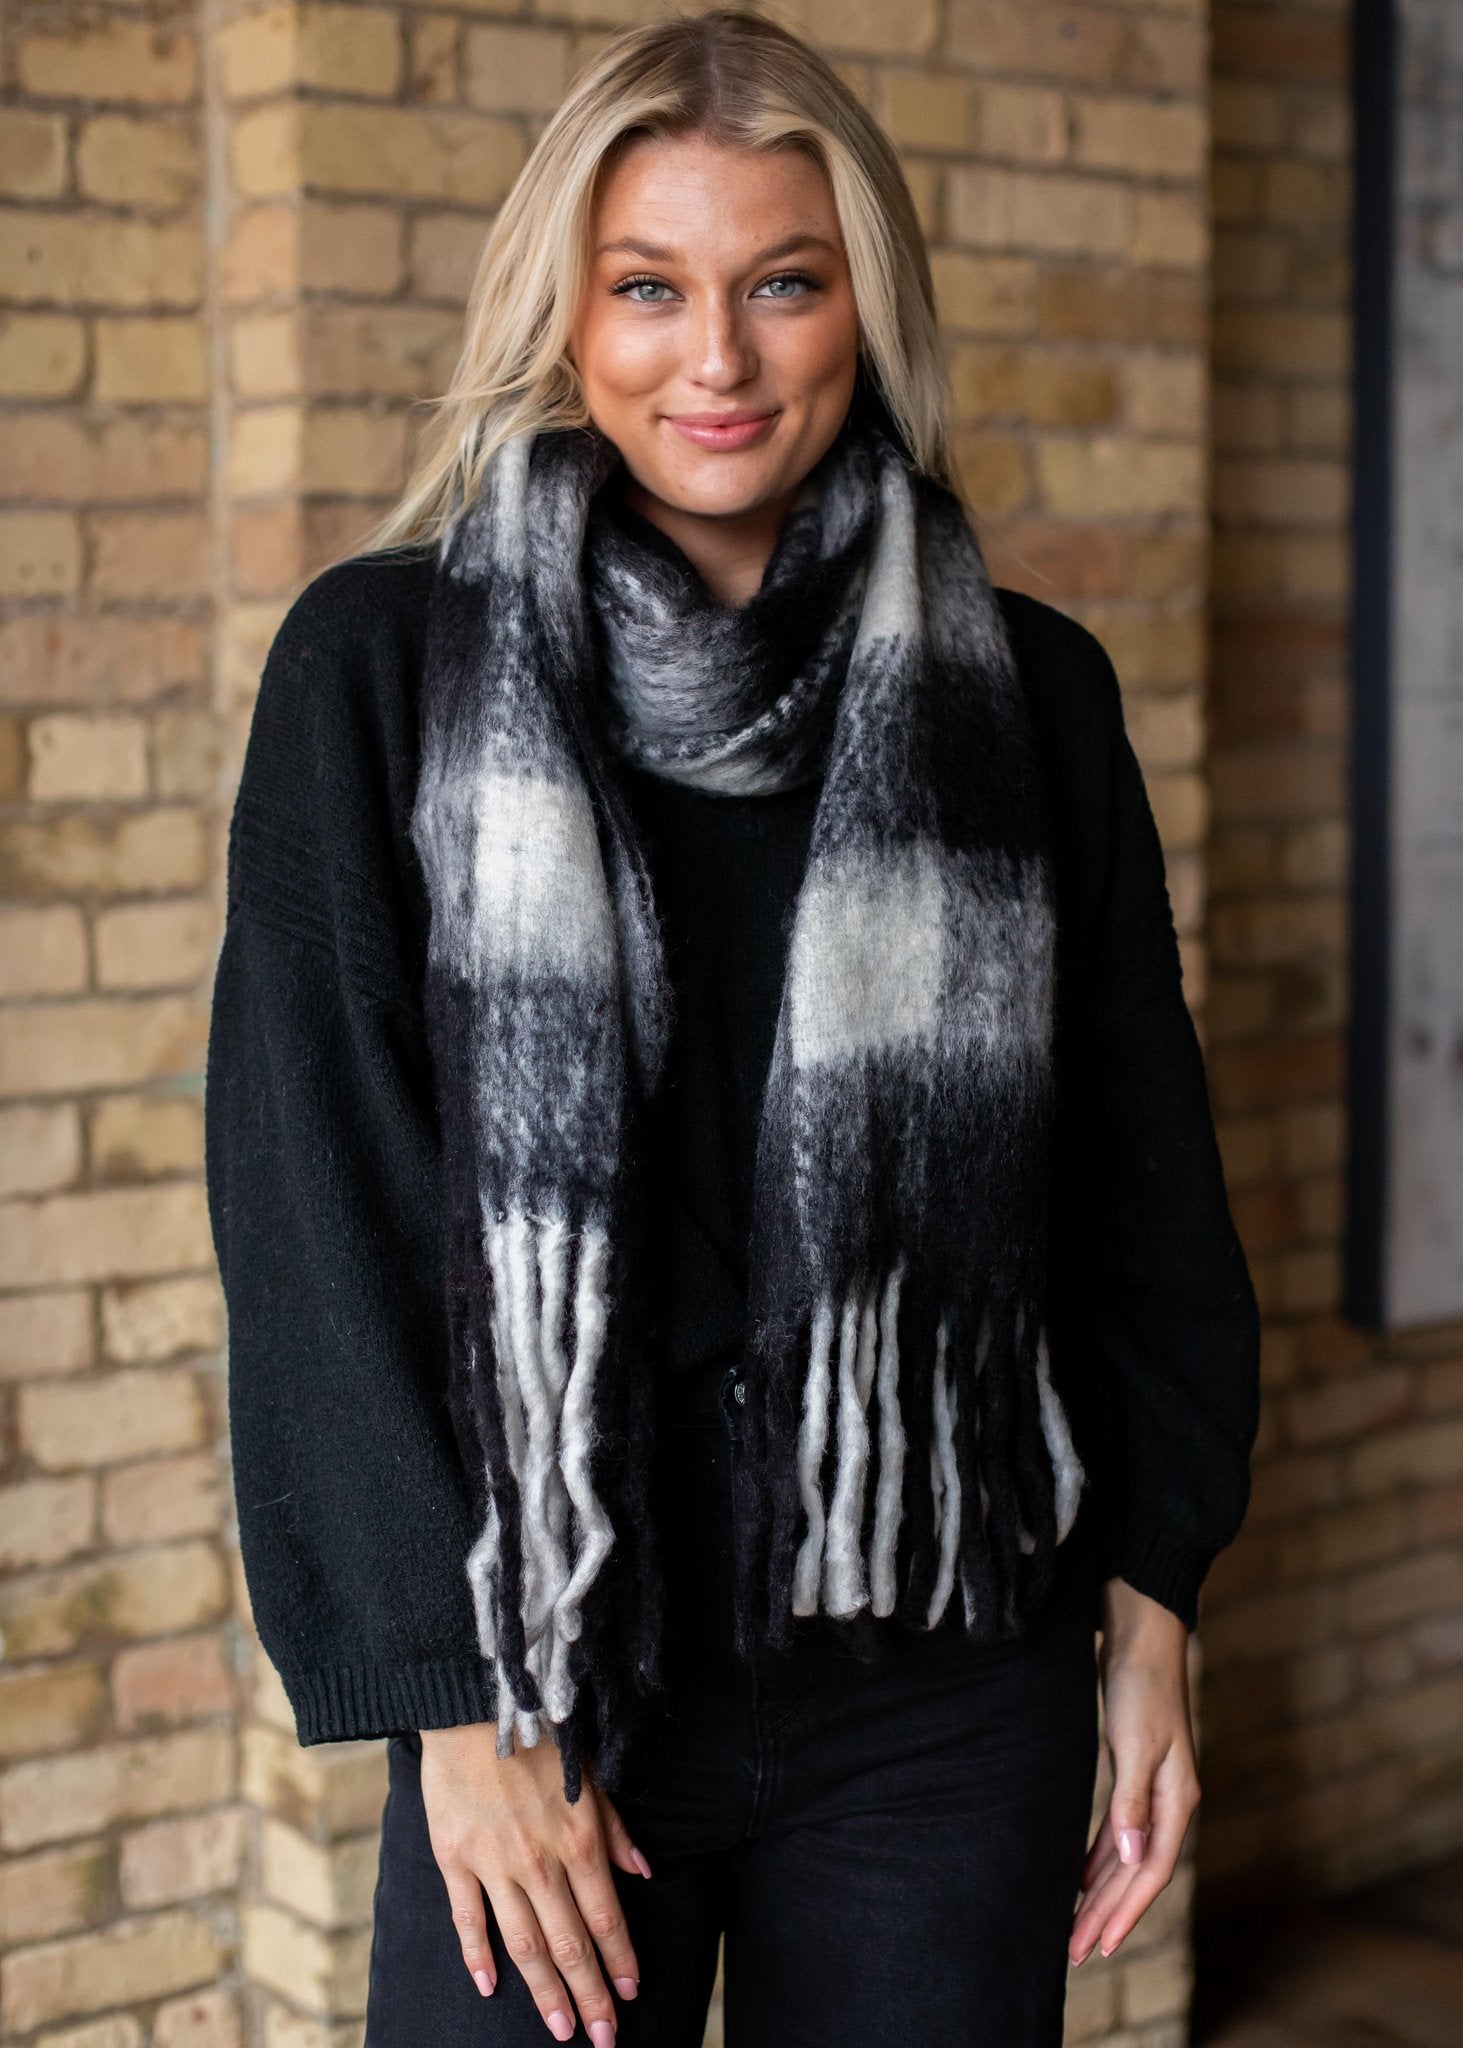 Black and white plaid long scarf with fringe